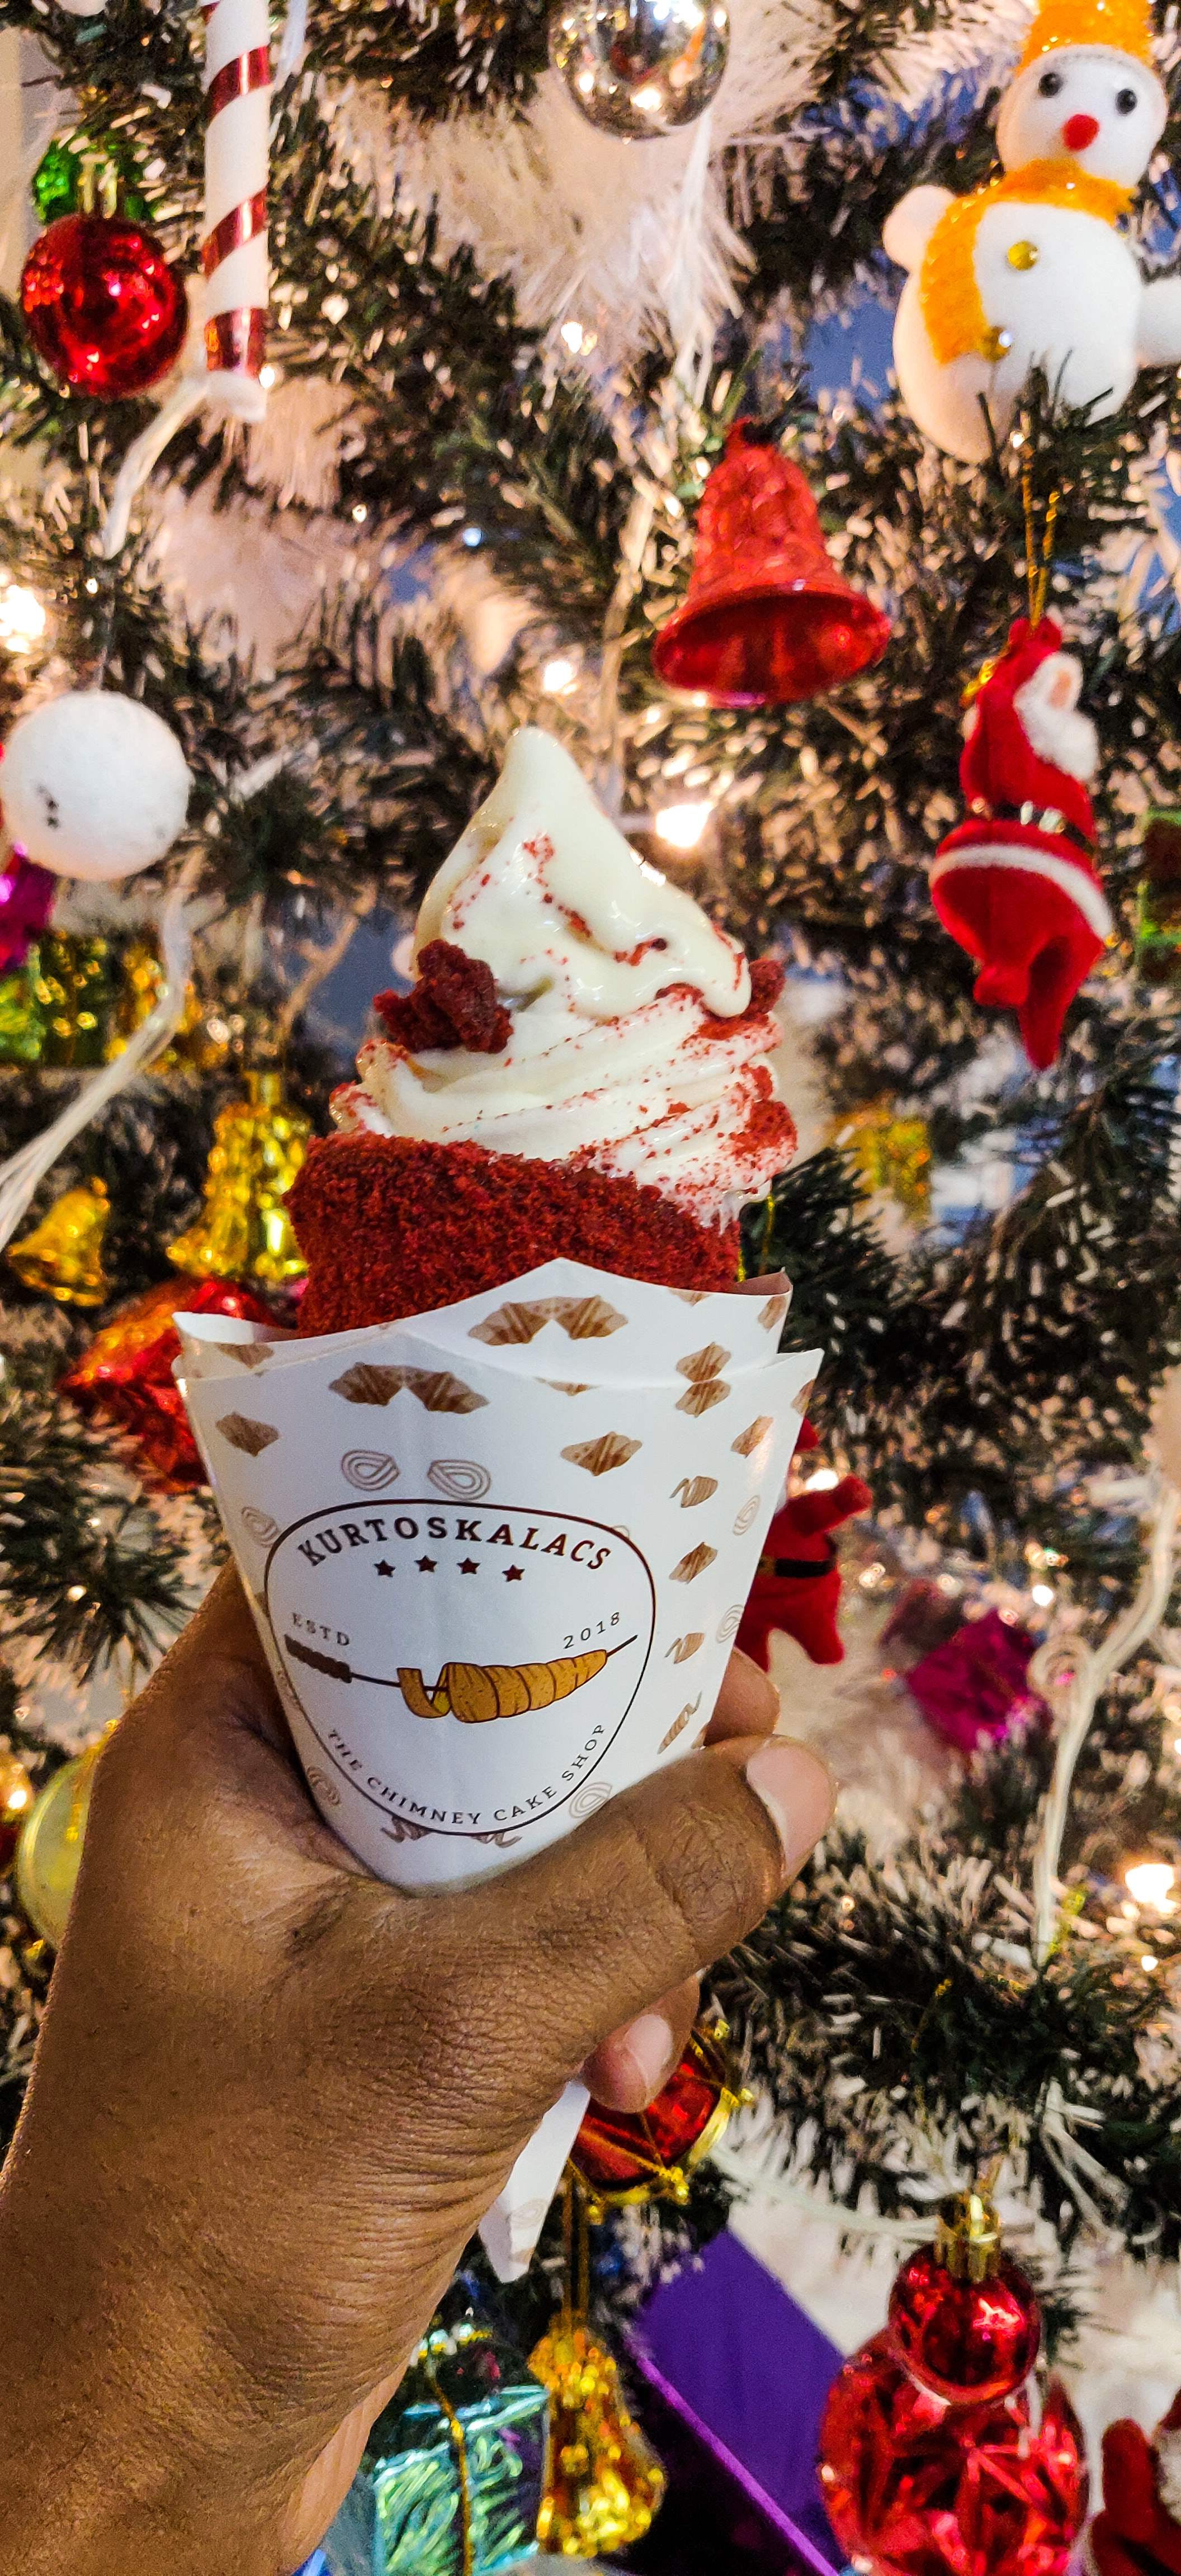 Christmas ornament,Christmas tree,Frozen dessert,Cone,Dessert,Tree,Ice cream,Christmas,Ice cream cone,Dairy